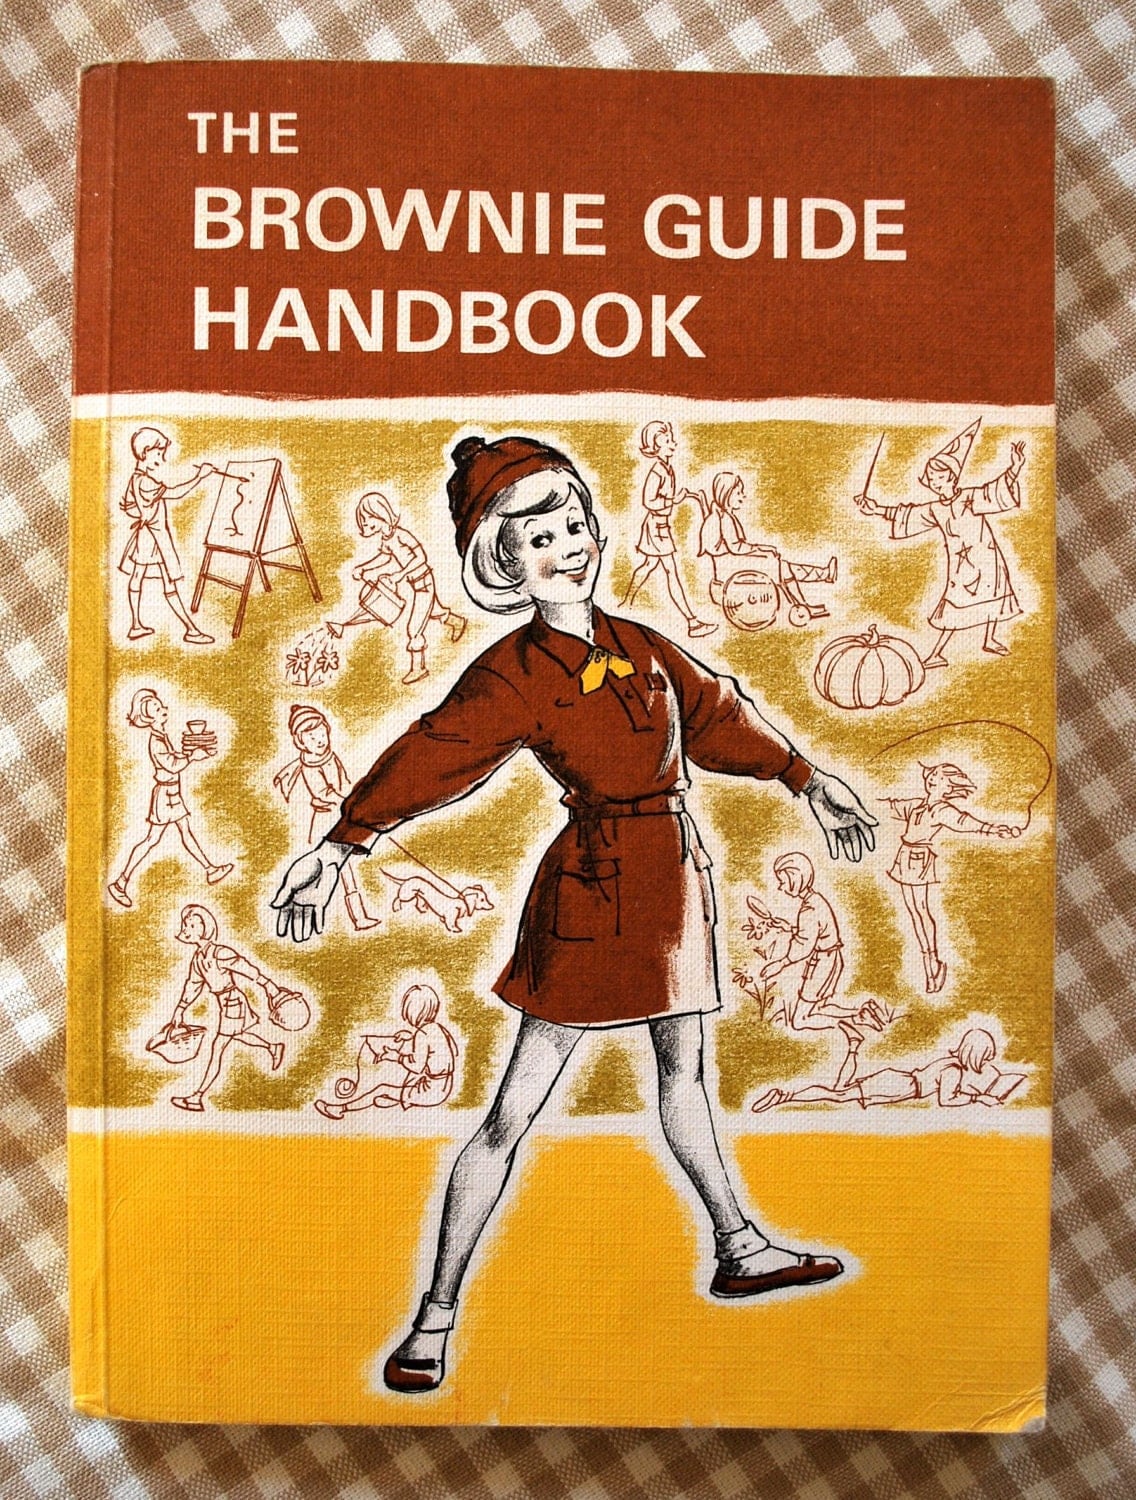 Image result for brownie guide handbook 1970s